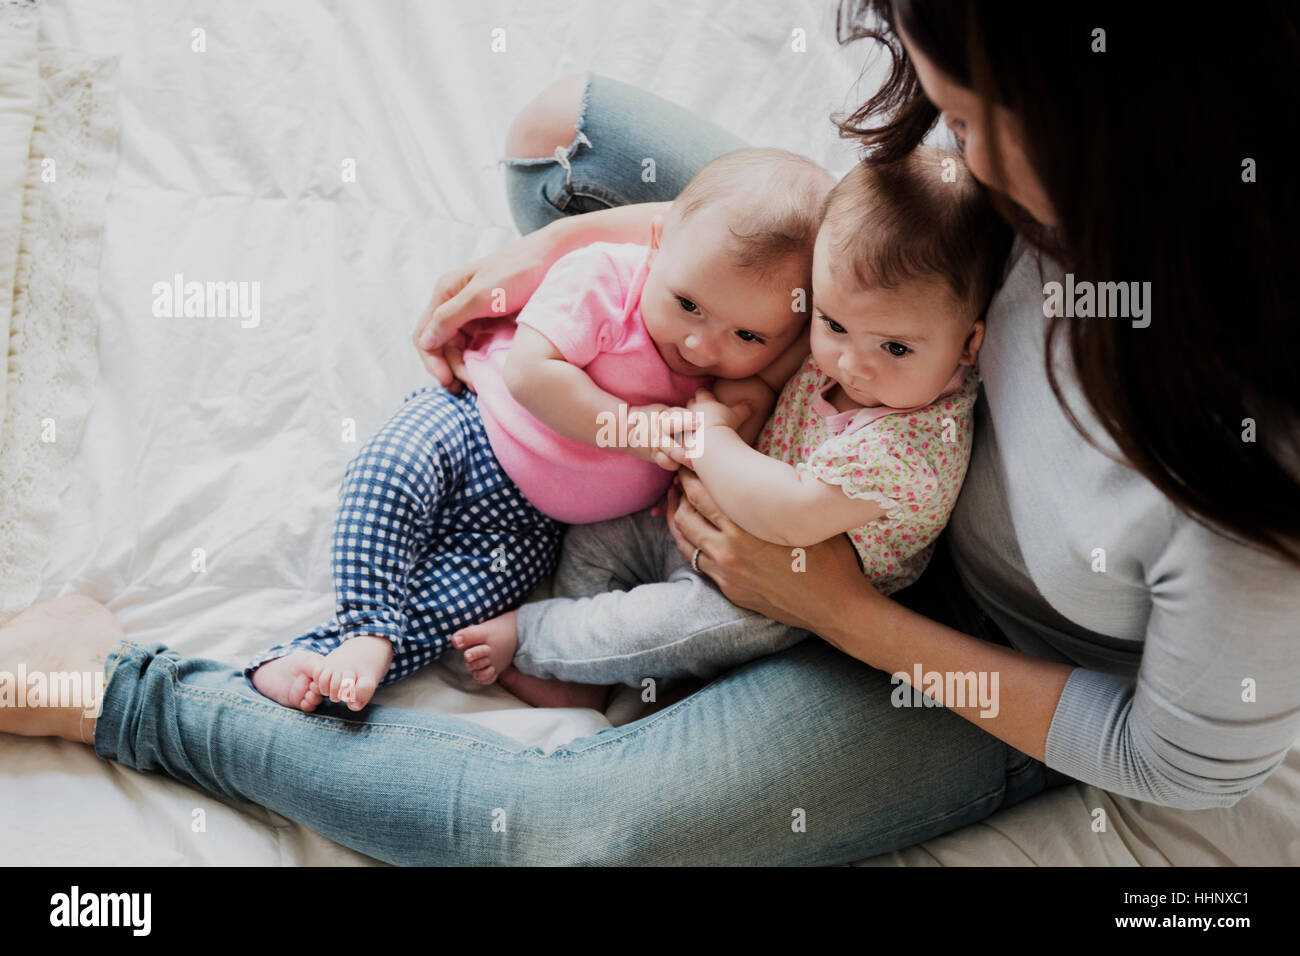 Caucasian mother sitting on bed holding twin baby daughters Stock Photo